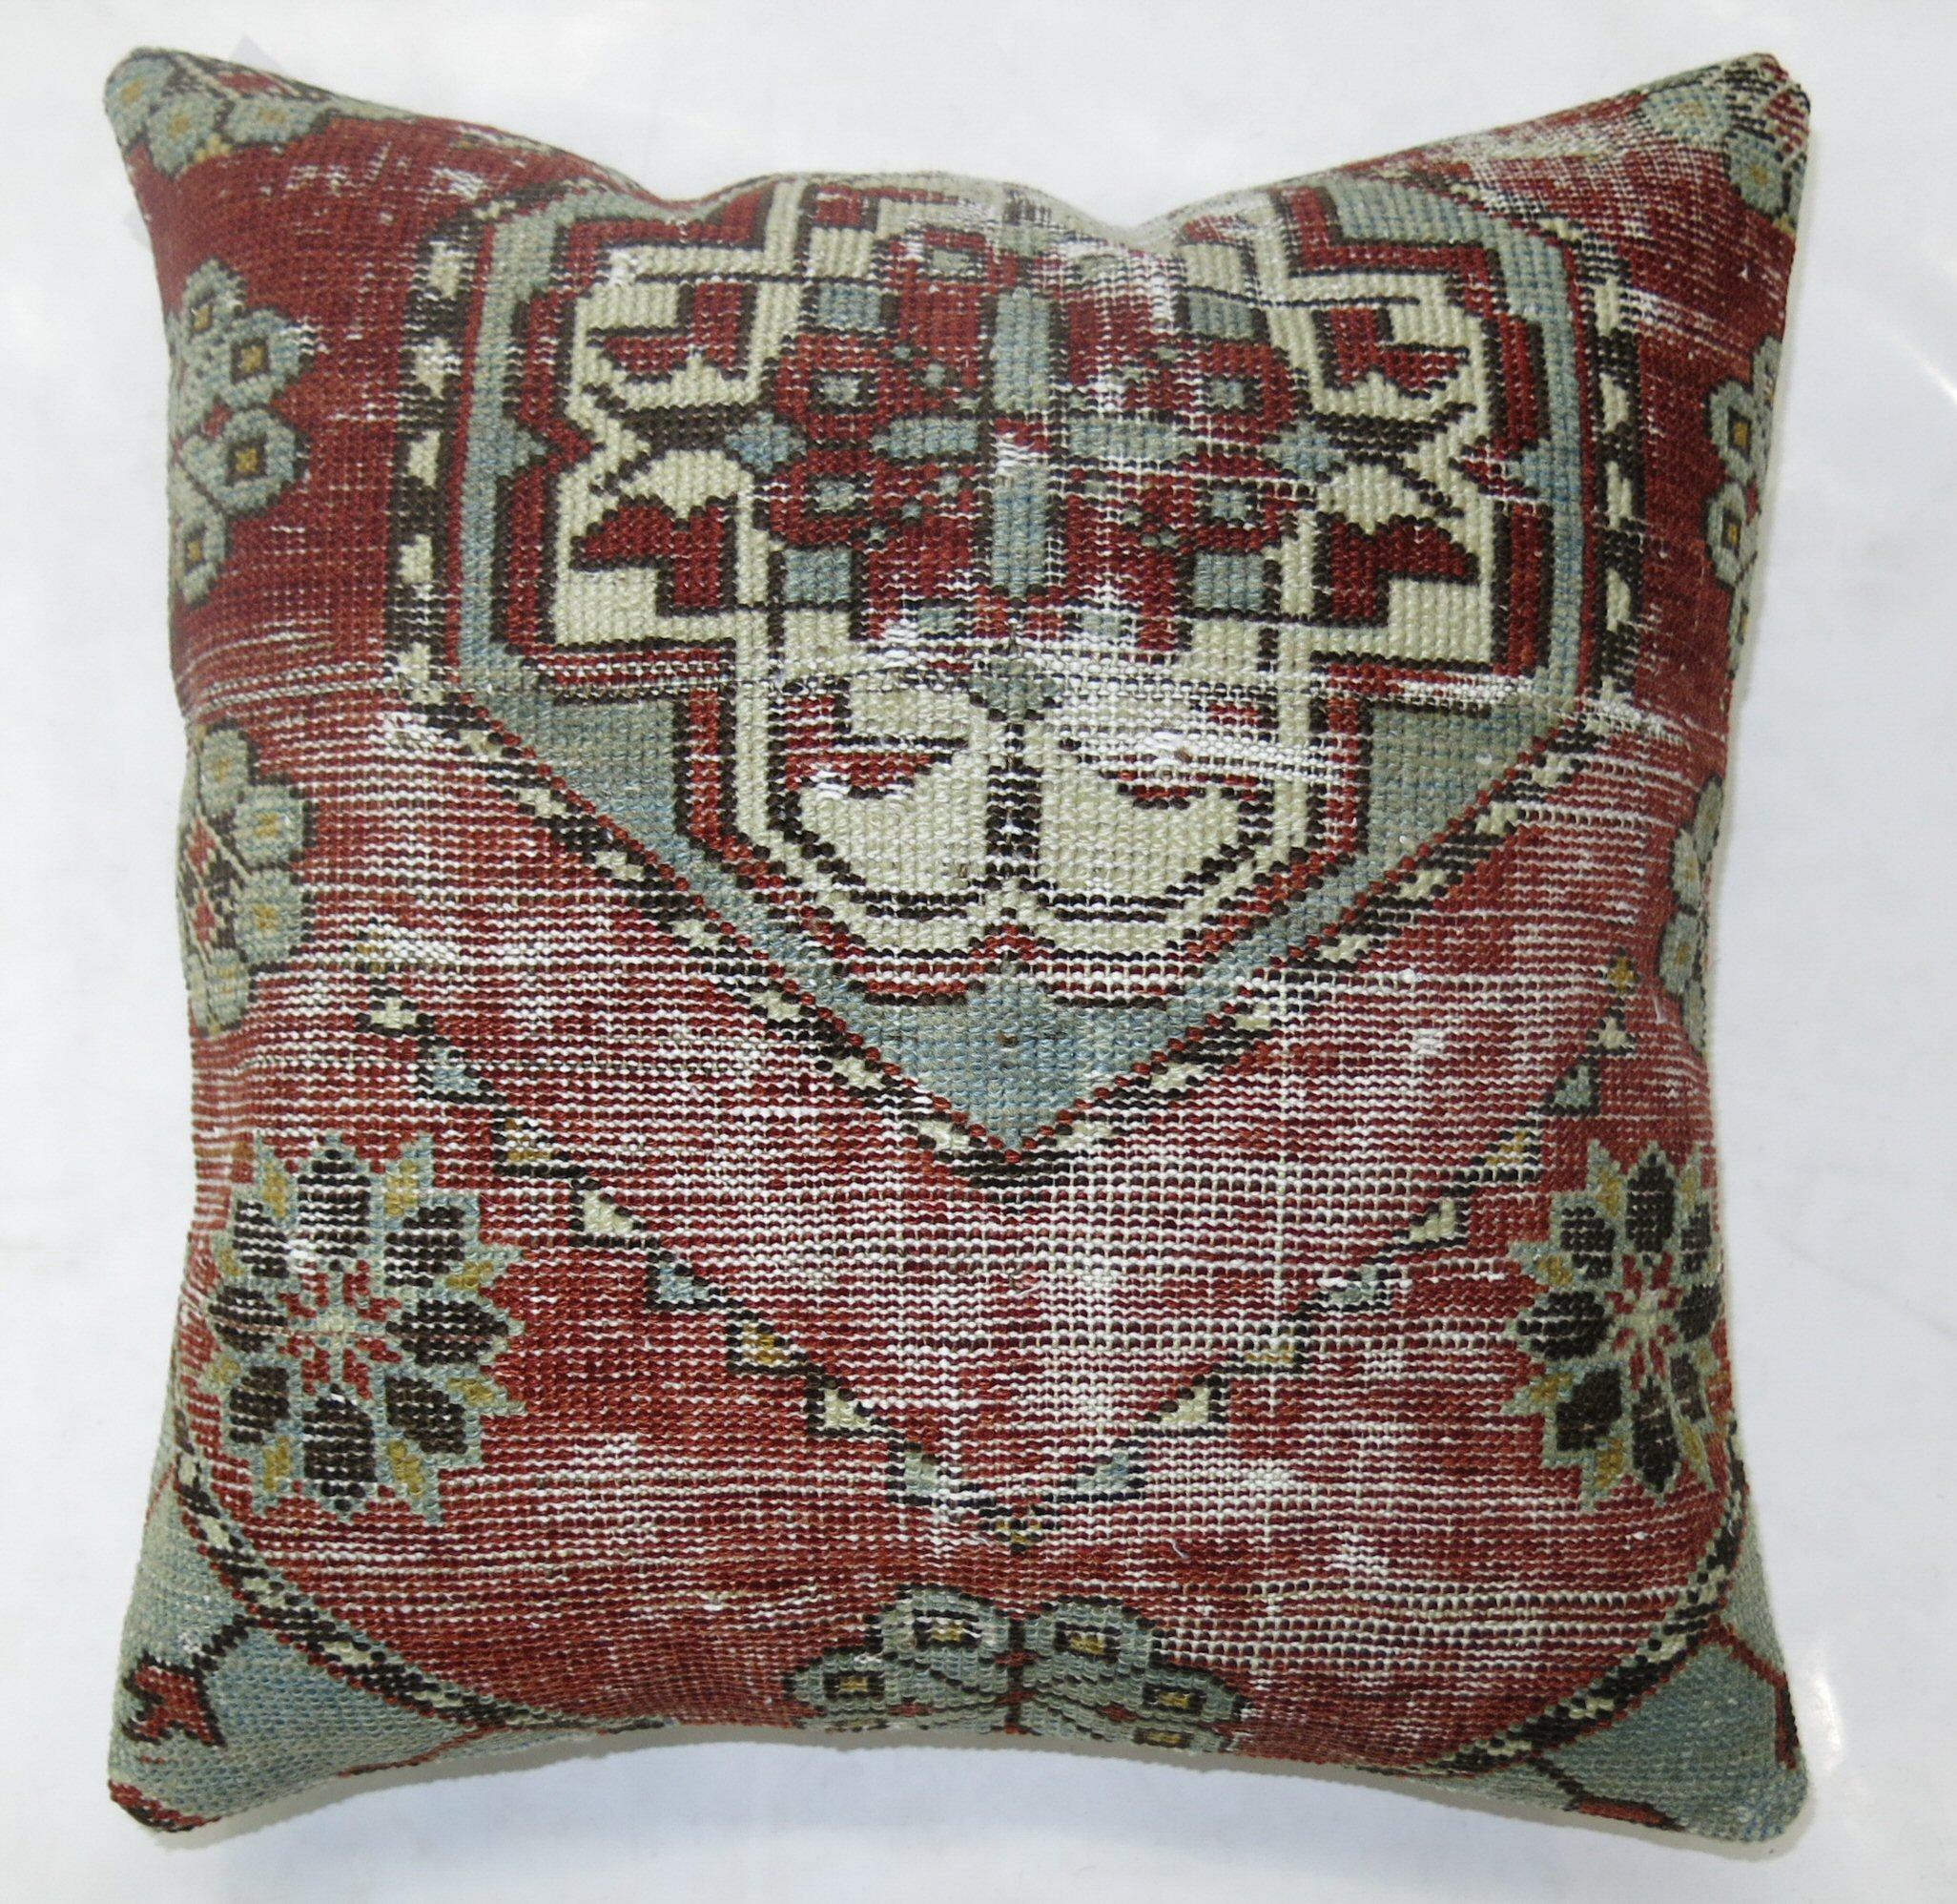 Pillow made from a 19th century distressed Caucasian rug.

16'' x 16''